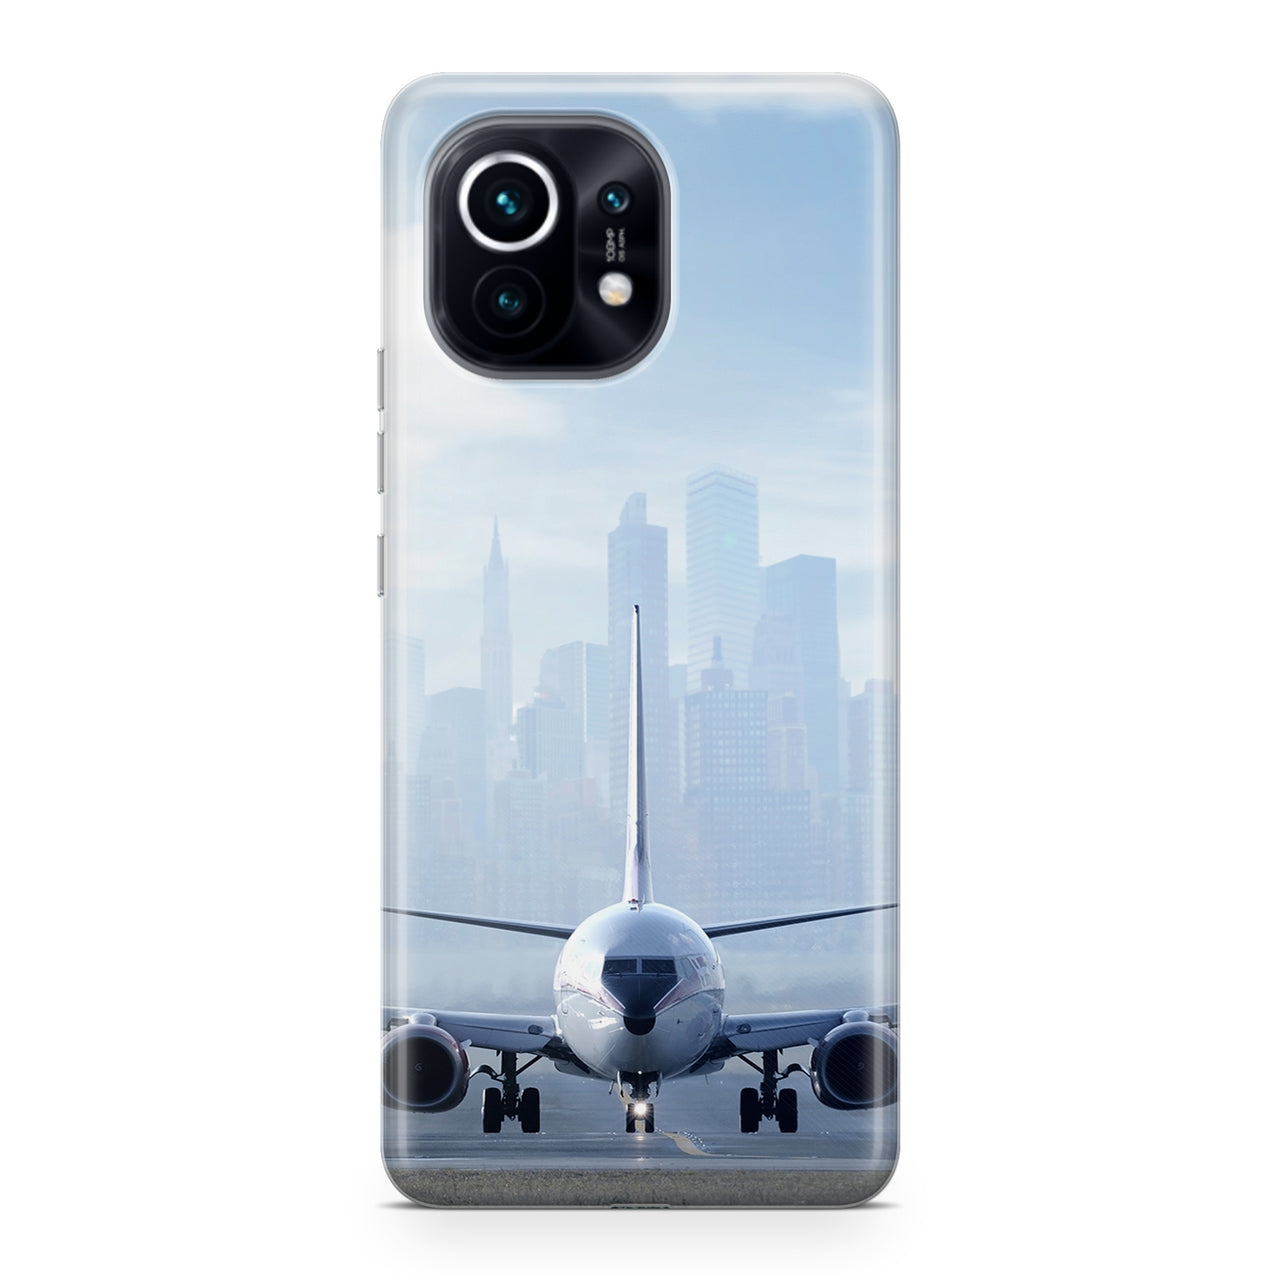 Boeing 737 & City View Behind Designed Xiaomi Cases